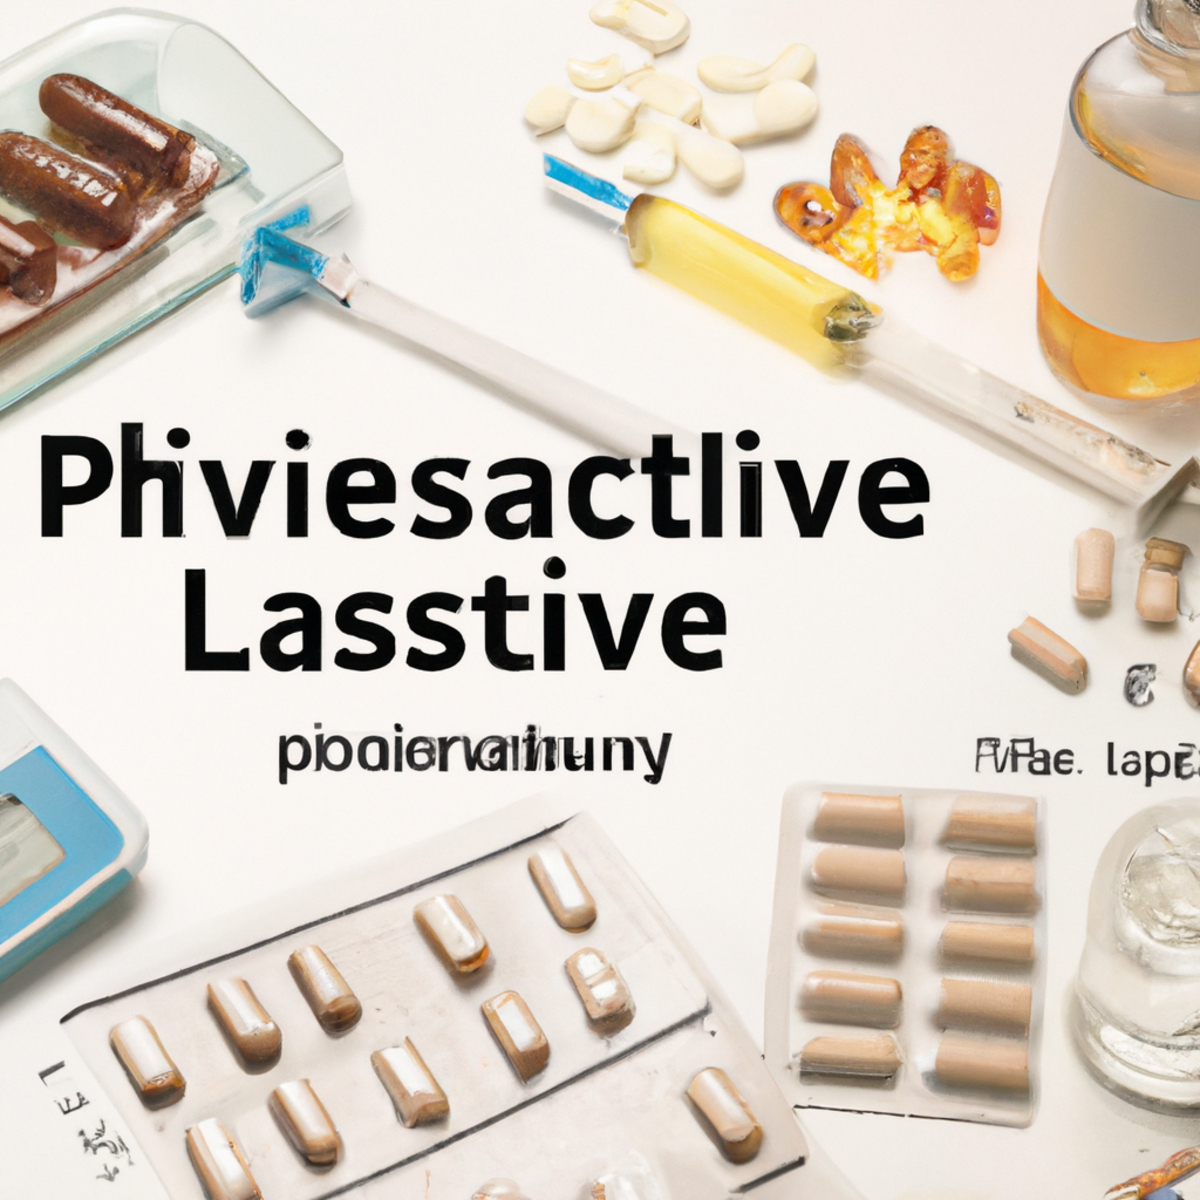 Medical setting with medications, equipment, and tools, representing comprehensive treatment for Progressive Familial Intrahepatic Cholestasis (PFIC).